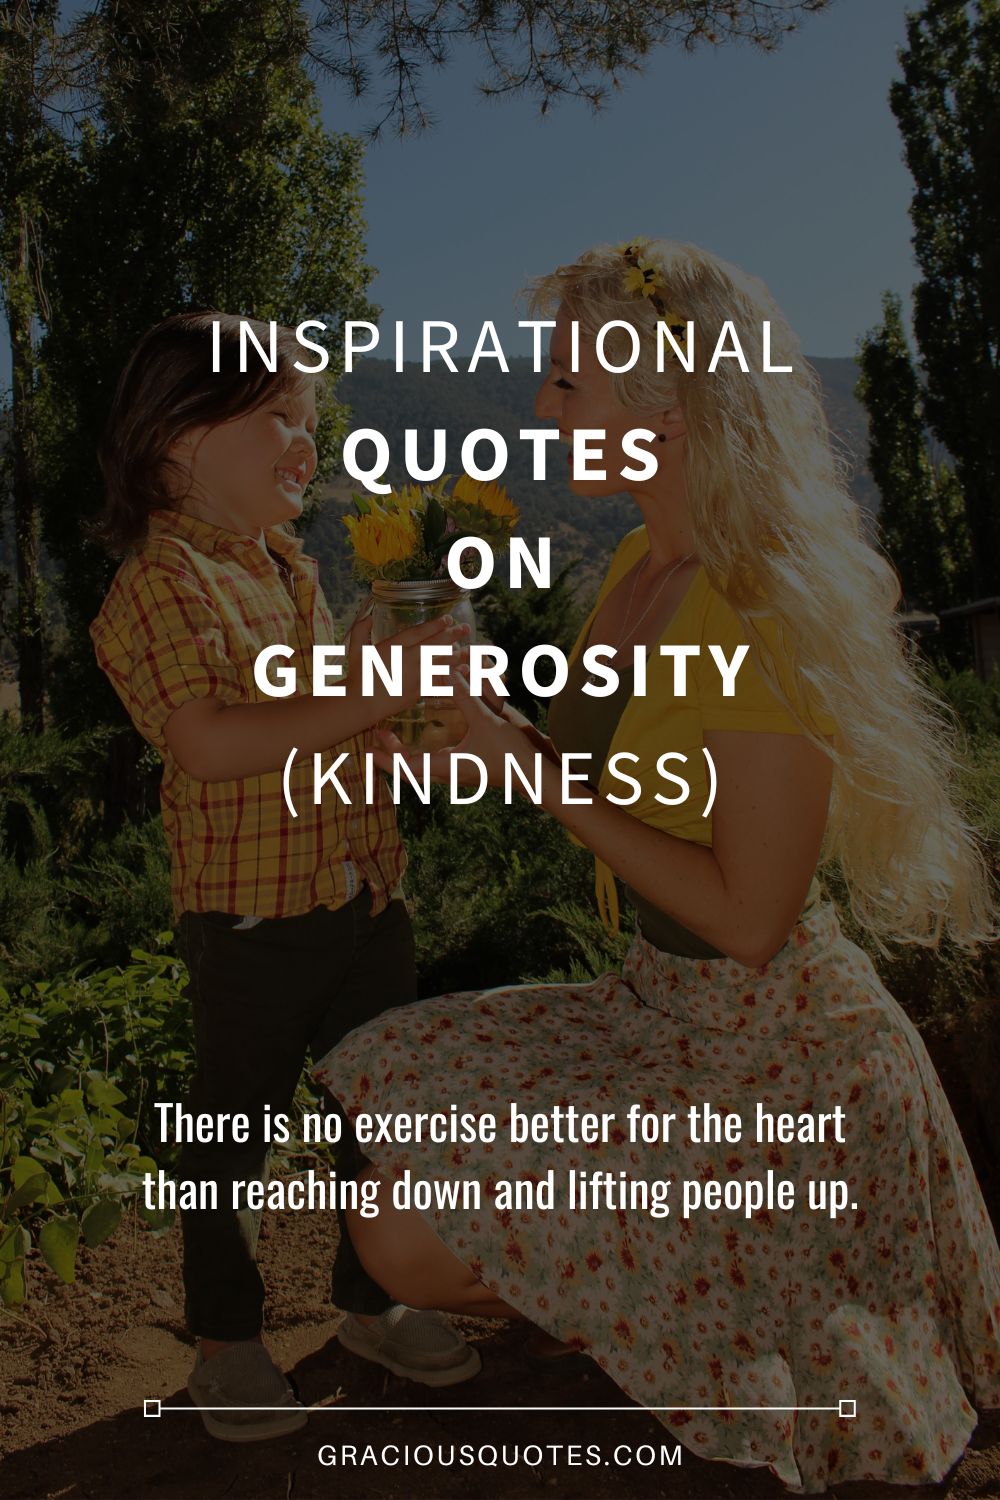 Inspirational Quotes on Generosity (KINDNESS) - Gracious Quotes